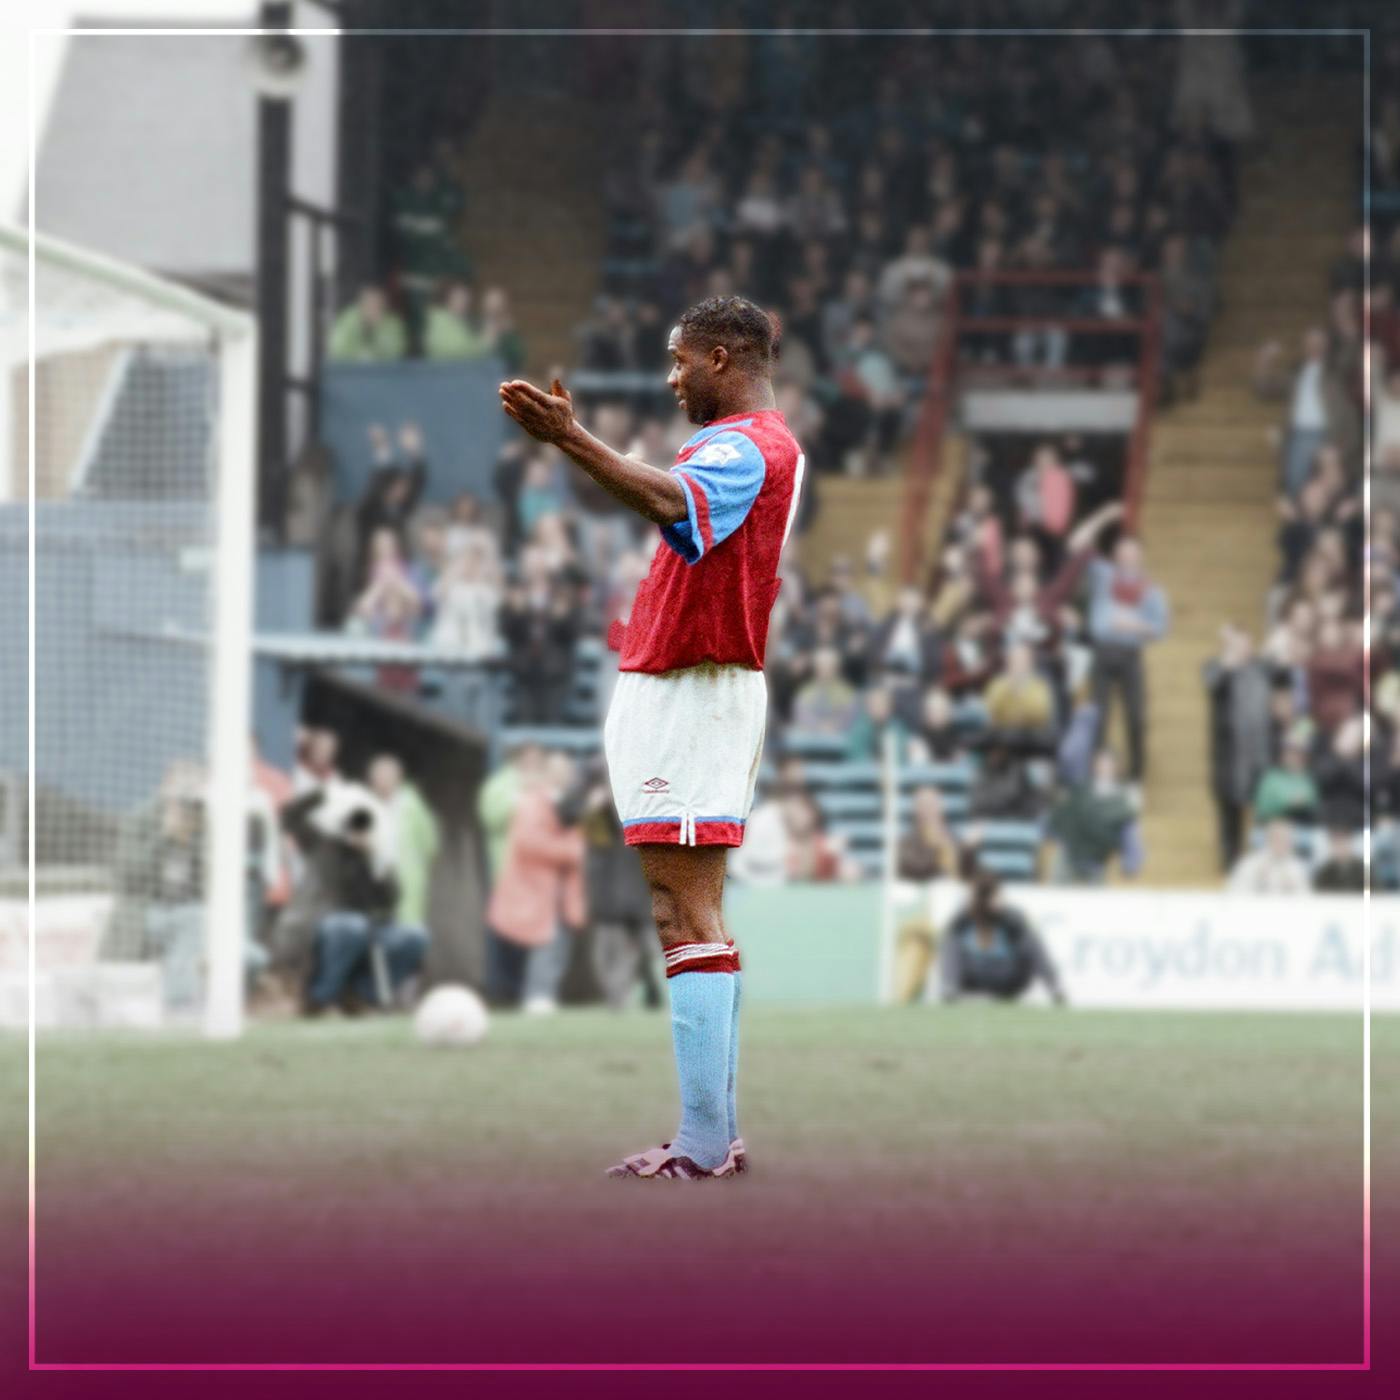 Dalian Atkinson’s lasting legacy - in the words of his big brother Paul